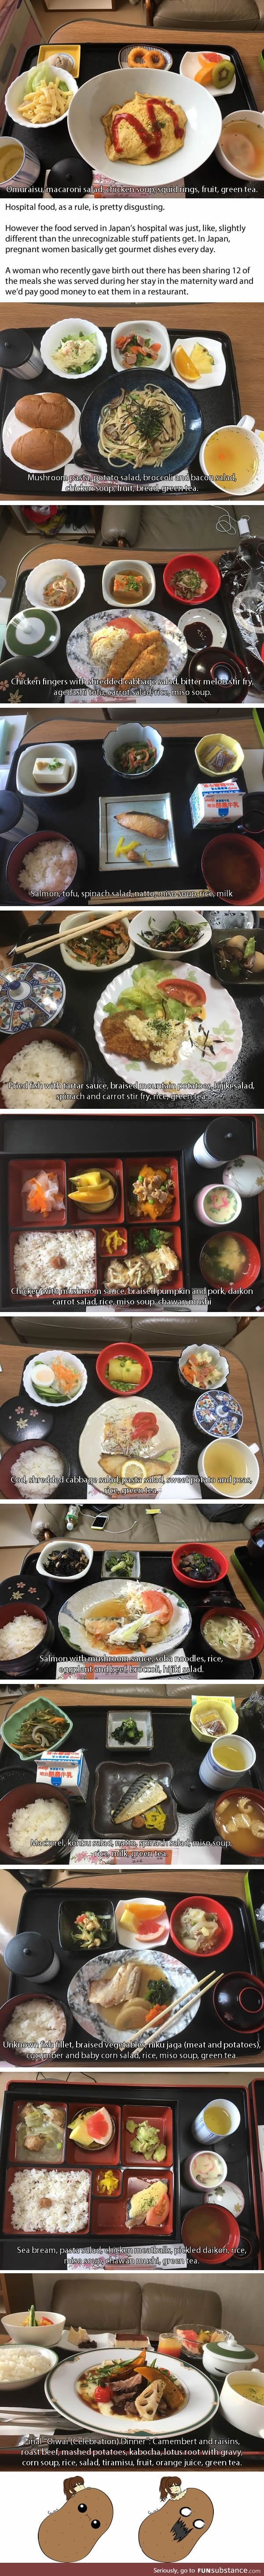 Woman Who Gave Birth In Japan Shares the Delicious Food She Had In The Hospital